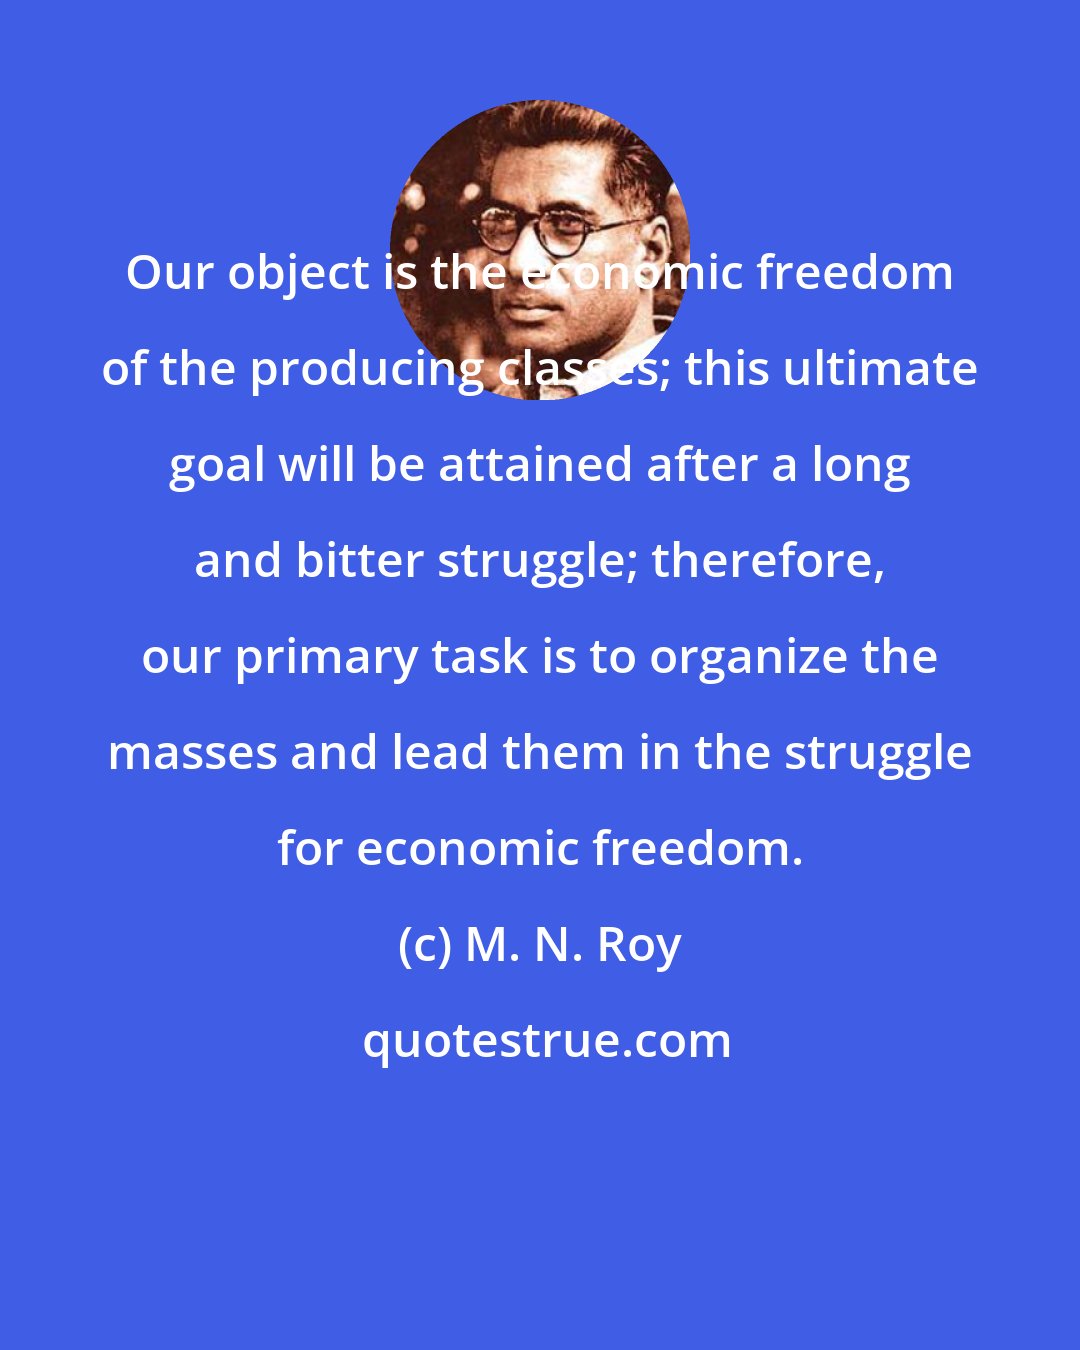 M. N. Roy: Our object is the economic freedom of the producing classes; this ultimate goal will be attained after a long and bitter struggle; therefore, our primary task is to organize the masses and lead them in the struggle for economic freedom.